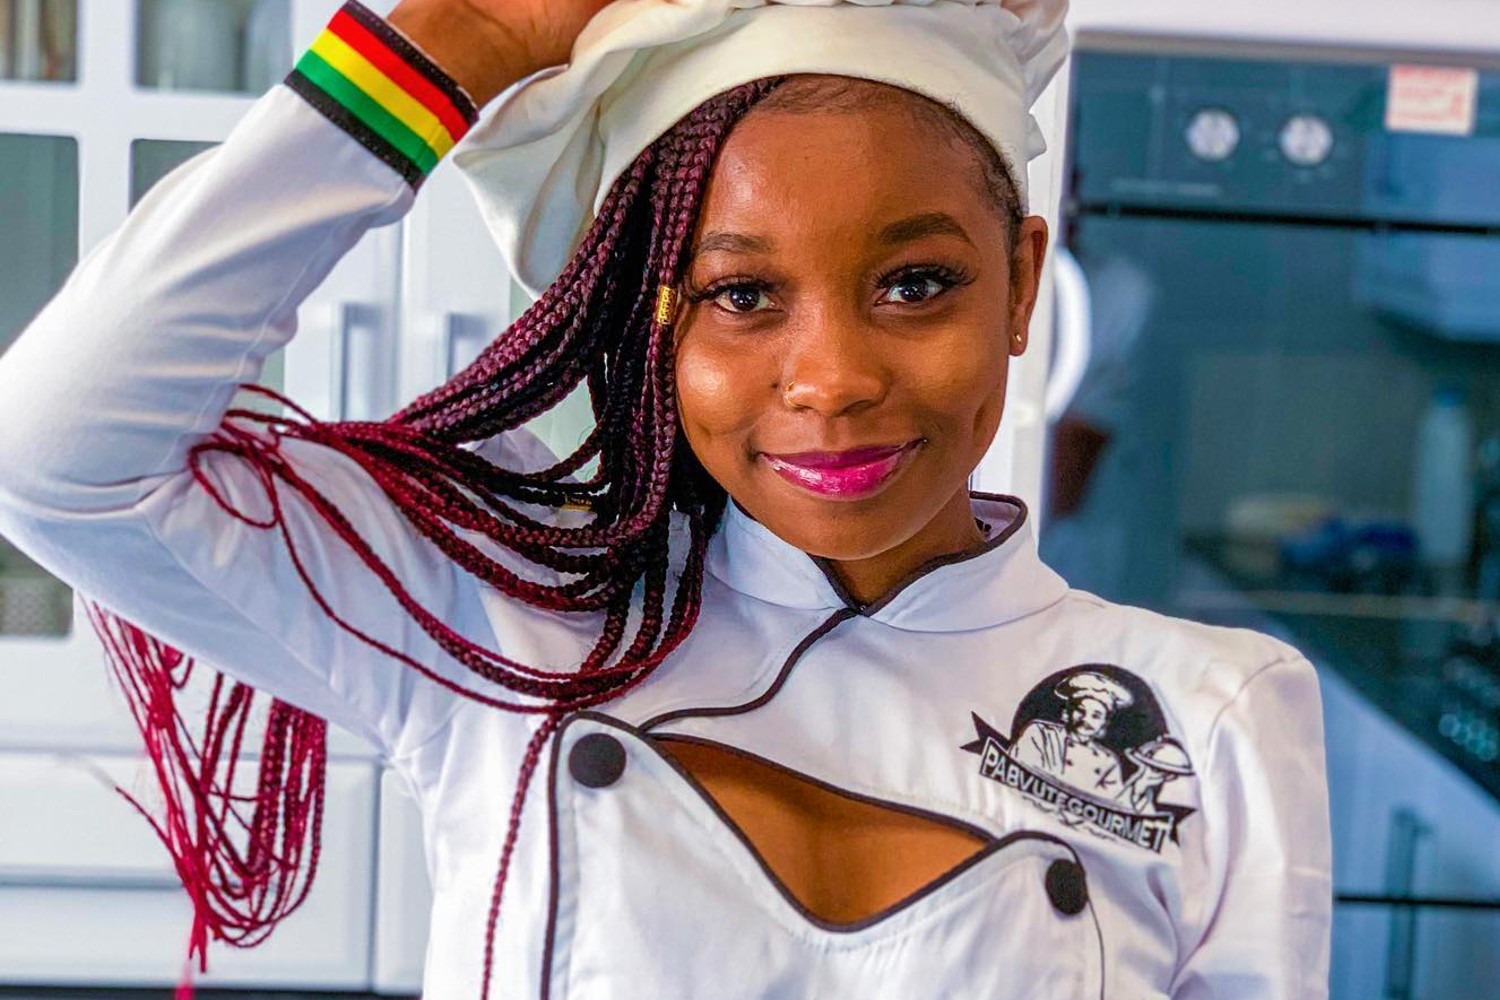 An Interview with Gracia Bvute of PaBvute Gourmet - A Culinary Trailblazer!